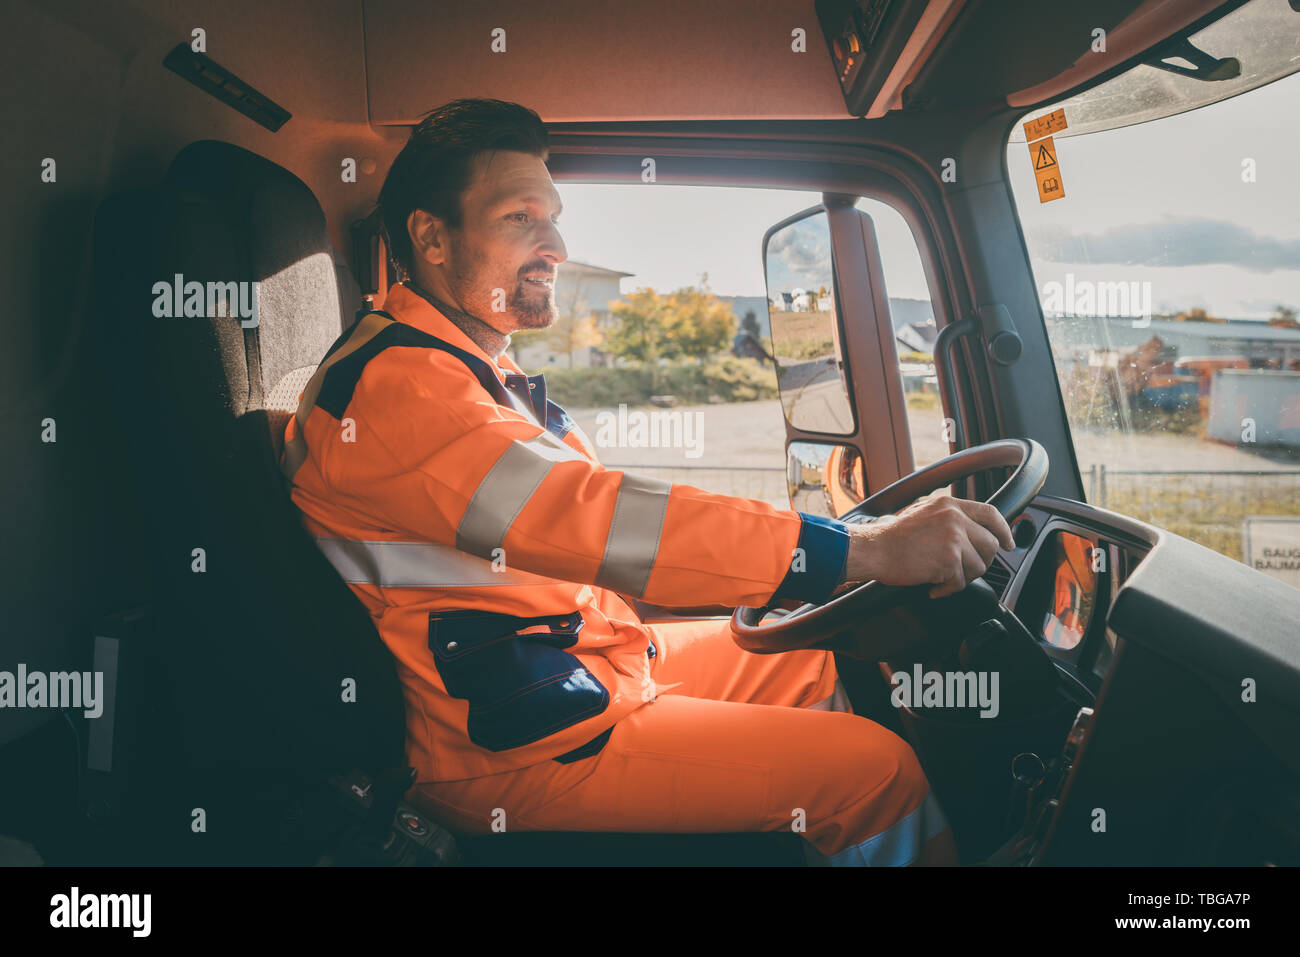 Garbage removal worker driving a dump truck  Stock Photo